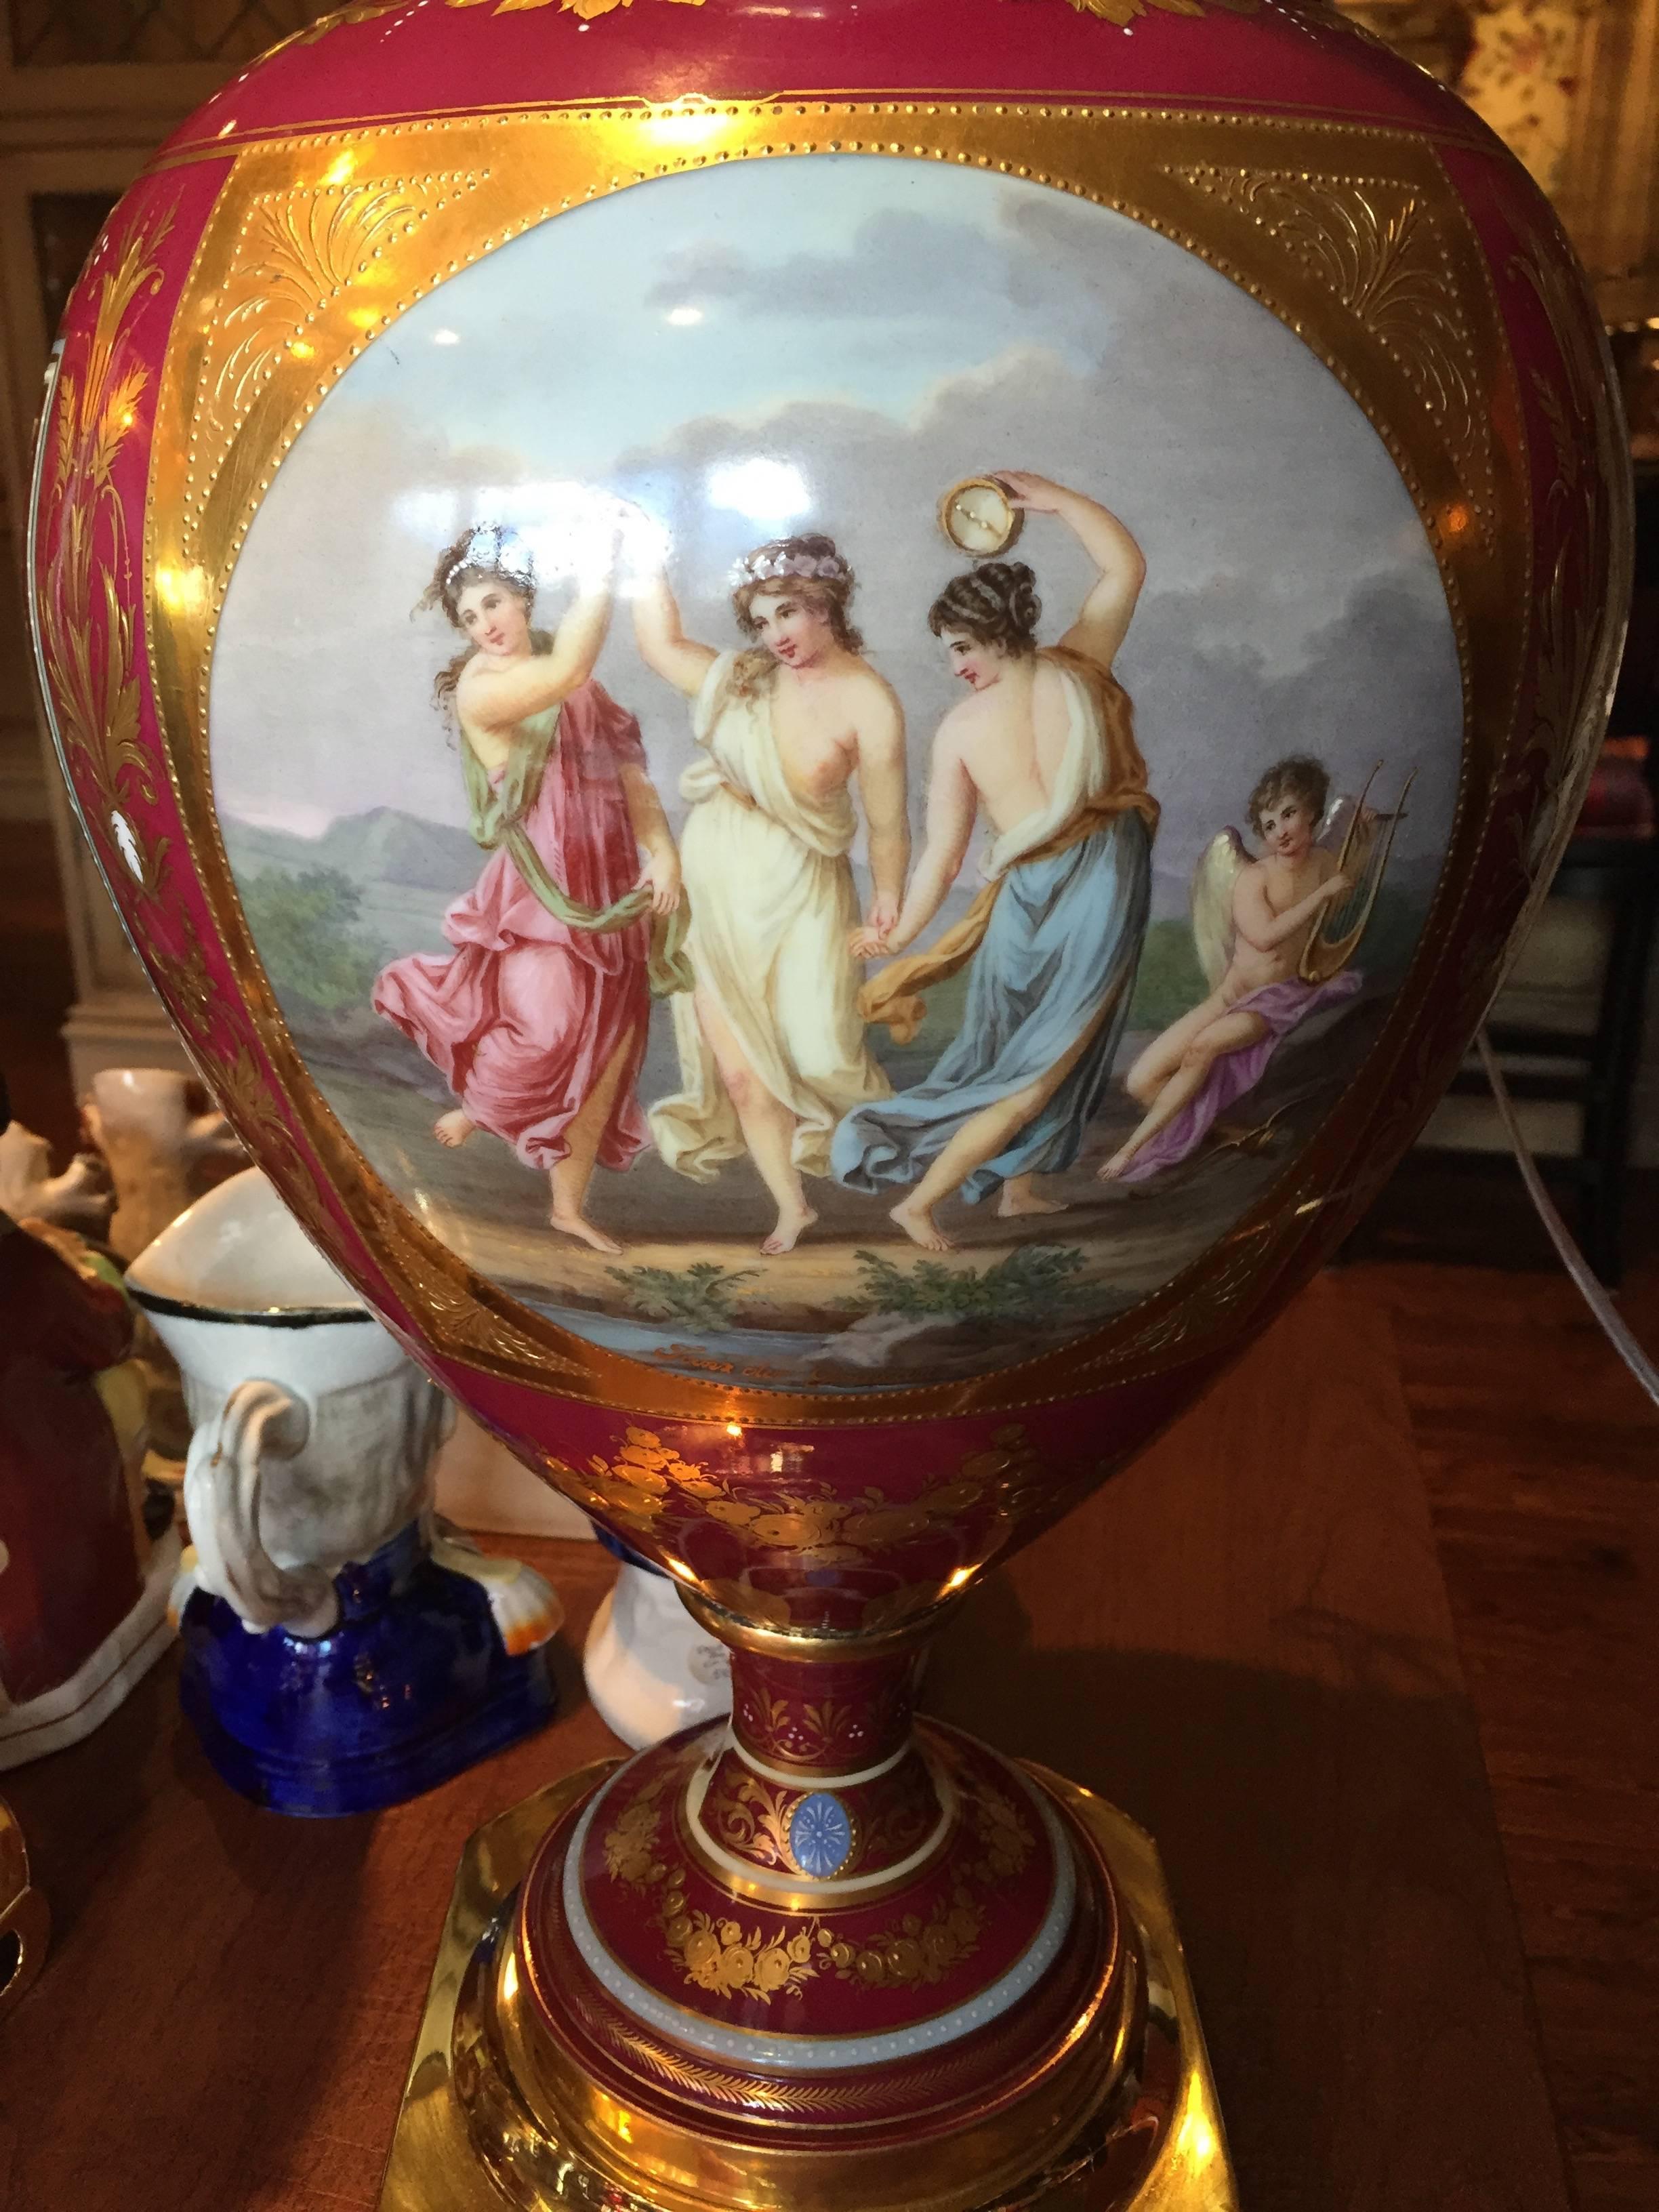 German porcelain Royal Vienna-style pair of large and fine cabinet vases, now with brass bases and lamp mounts, the pink or red globular bodies with flaring necks and socketed ankles over the spreading feet, with inset squares, rectangles and ovals